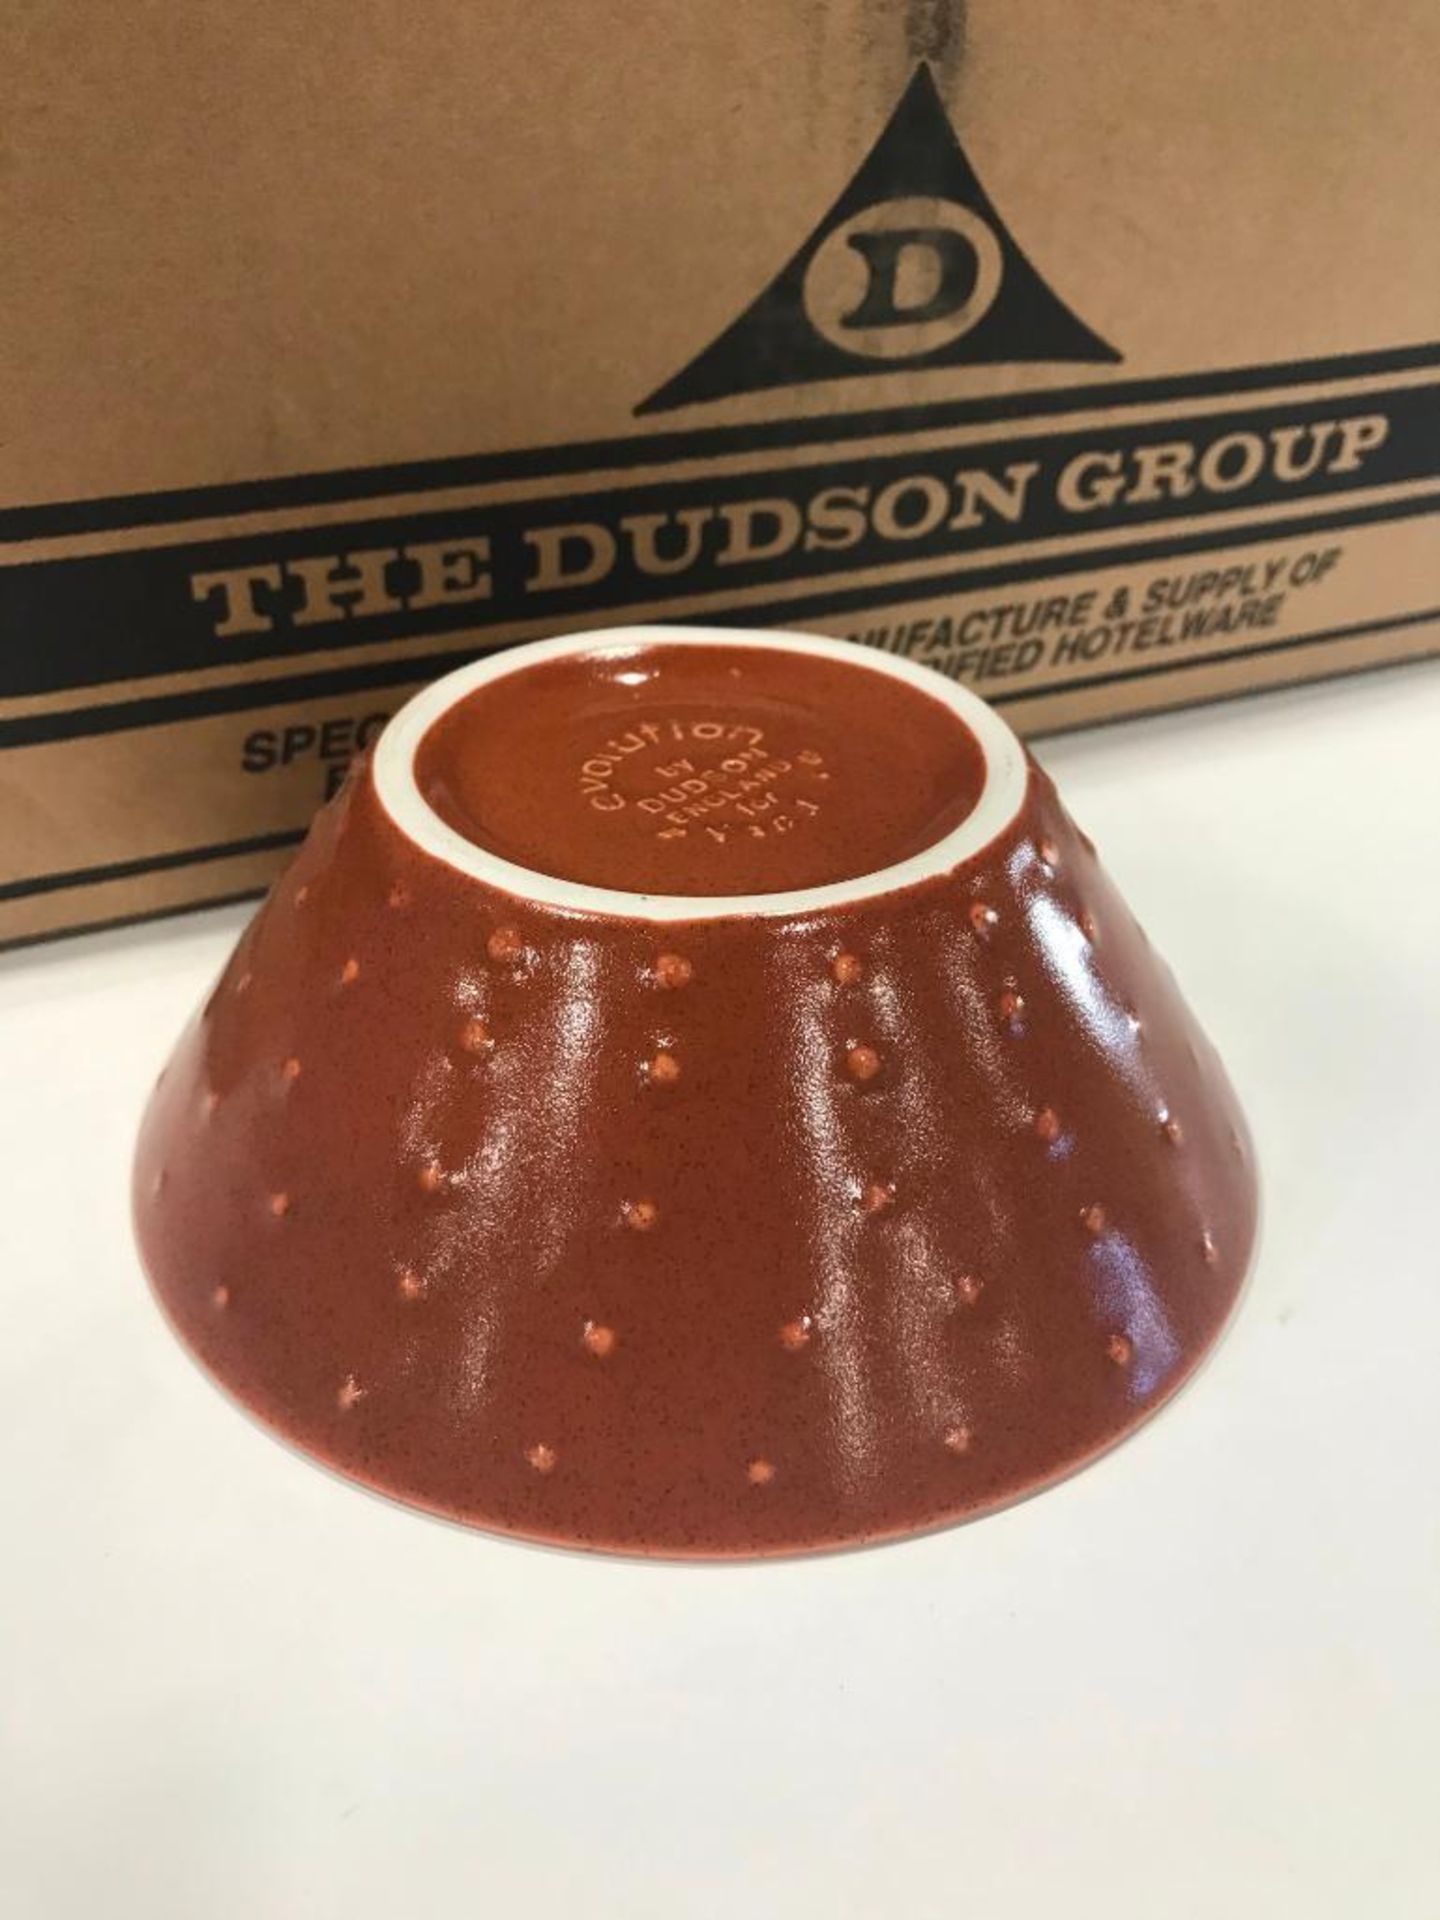 DUDSON TERRACOTTA DOT EMBOSSED 11 OZ BOWL - 36/CASE, MADE IN ENGLAND - Image 4 of 6